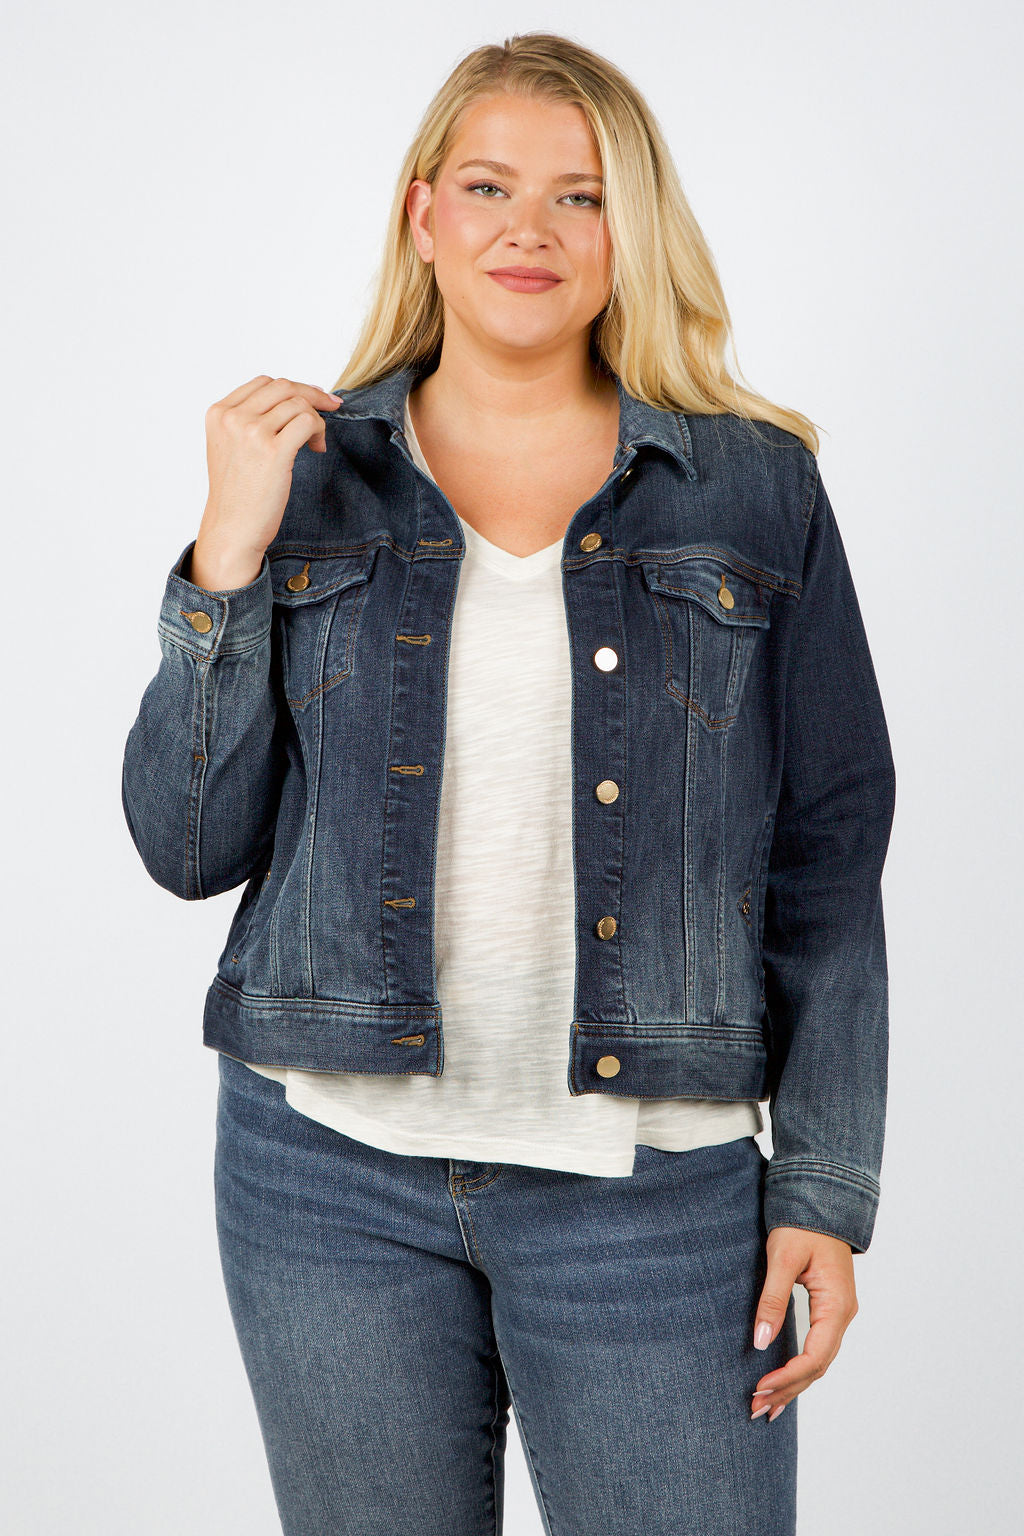 CLASSIC JEAN JACKET - AMOUR781